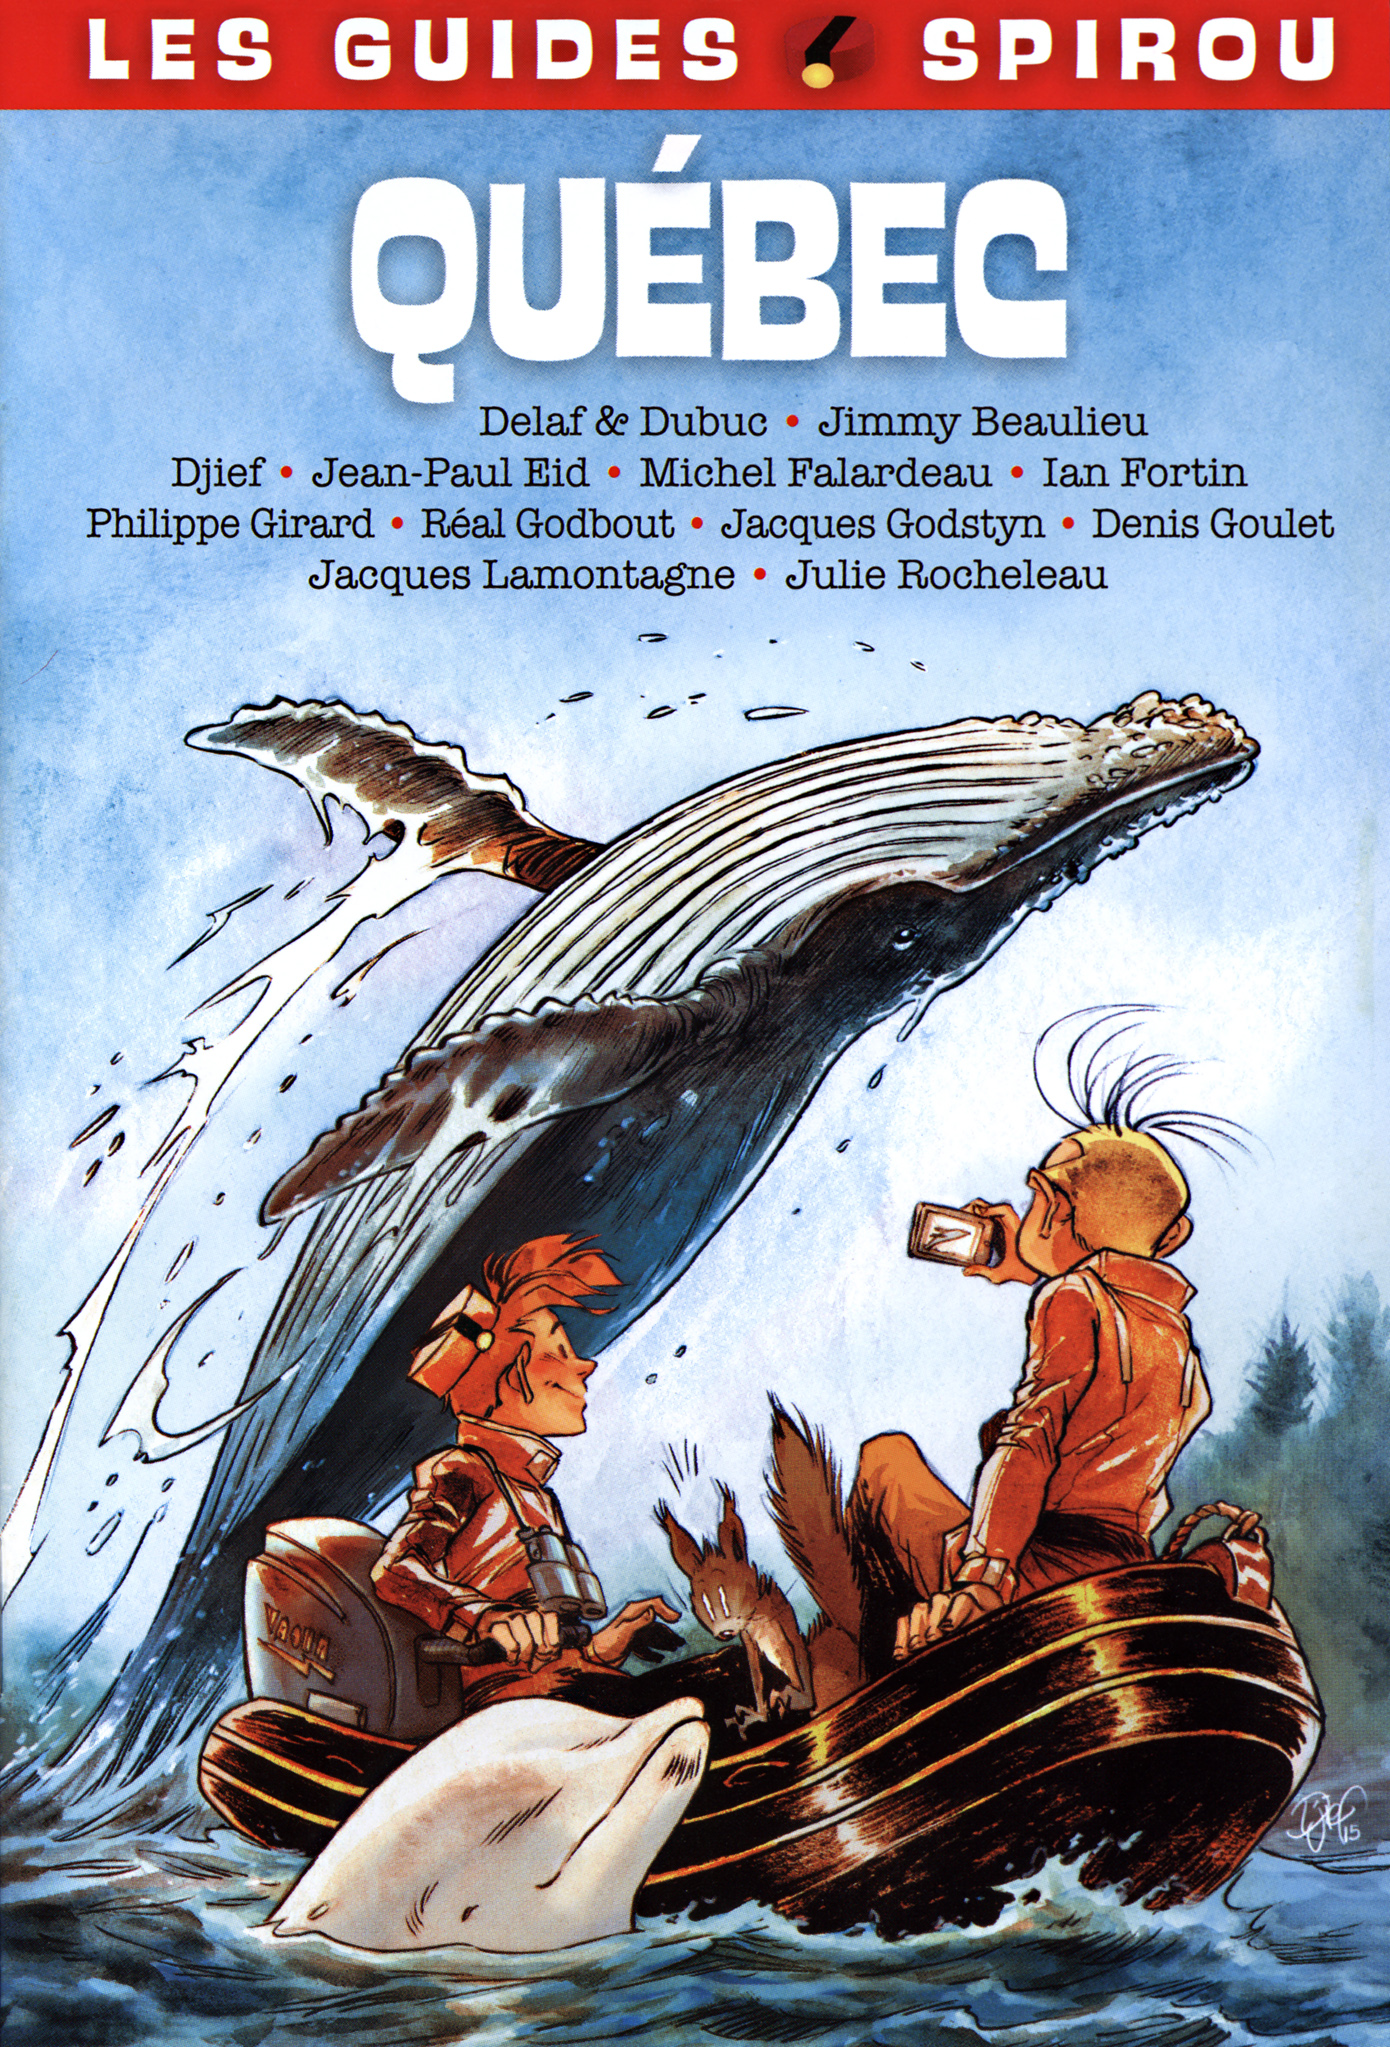 'Les Guides Spirou : Québec' supplement to JdS #4042 (ill. Djief; (c) Dupuis and the artist)